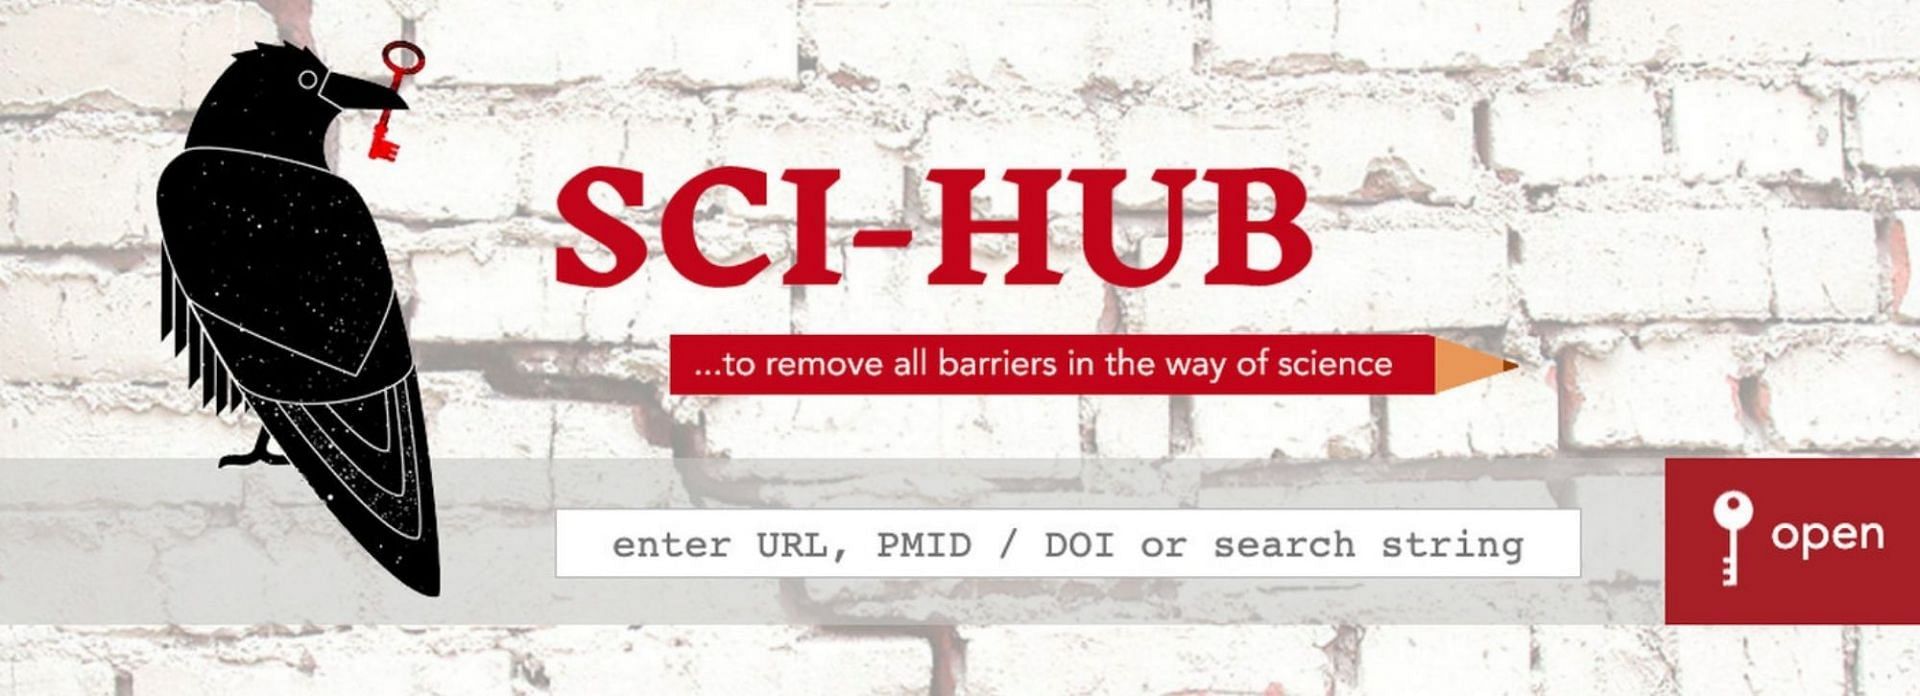 A trustable source for science research (Image via Sci-Hub)